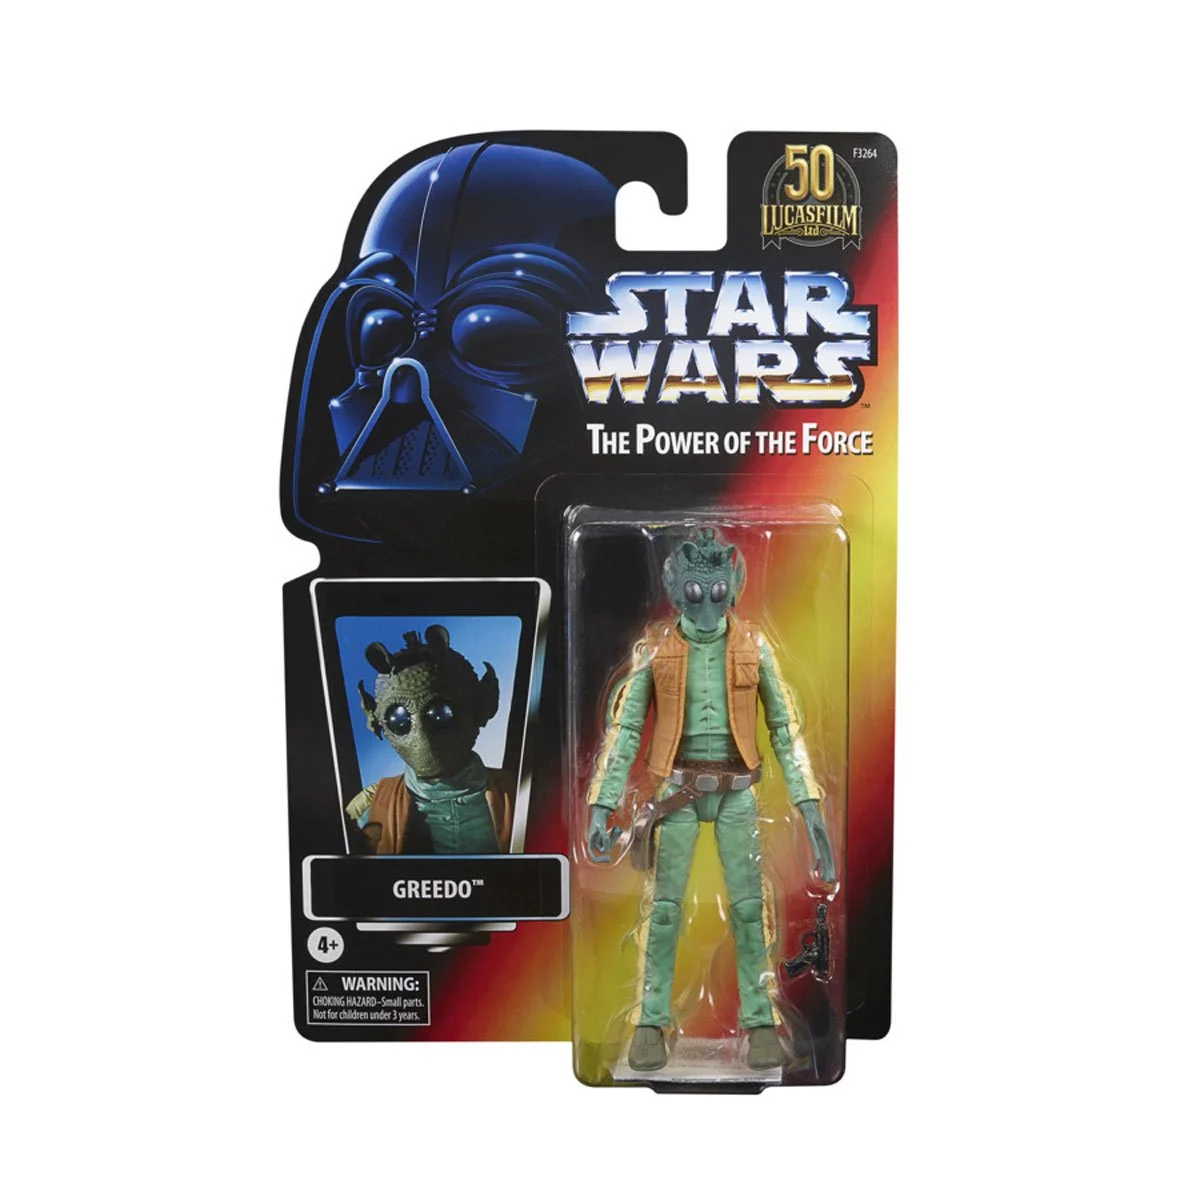 Star Wars The Black Series The Power of the Force 6-Inch Action Figure Greedo - Exclusive